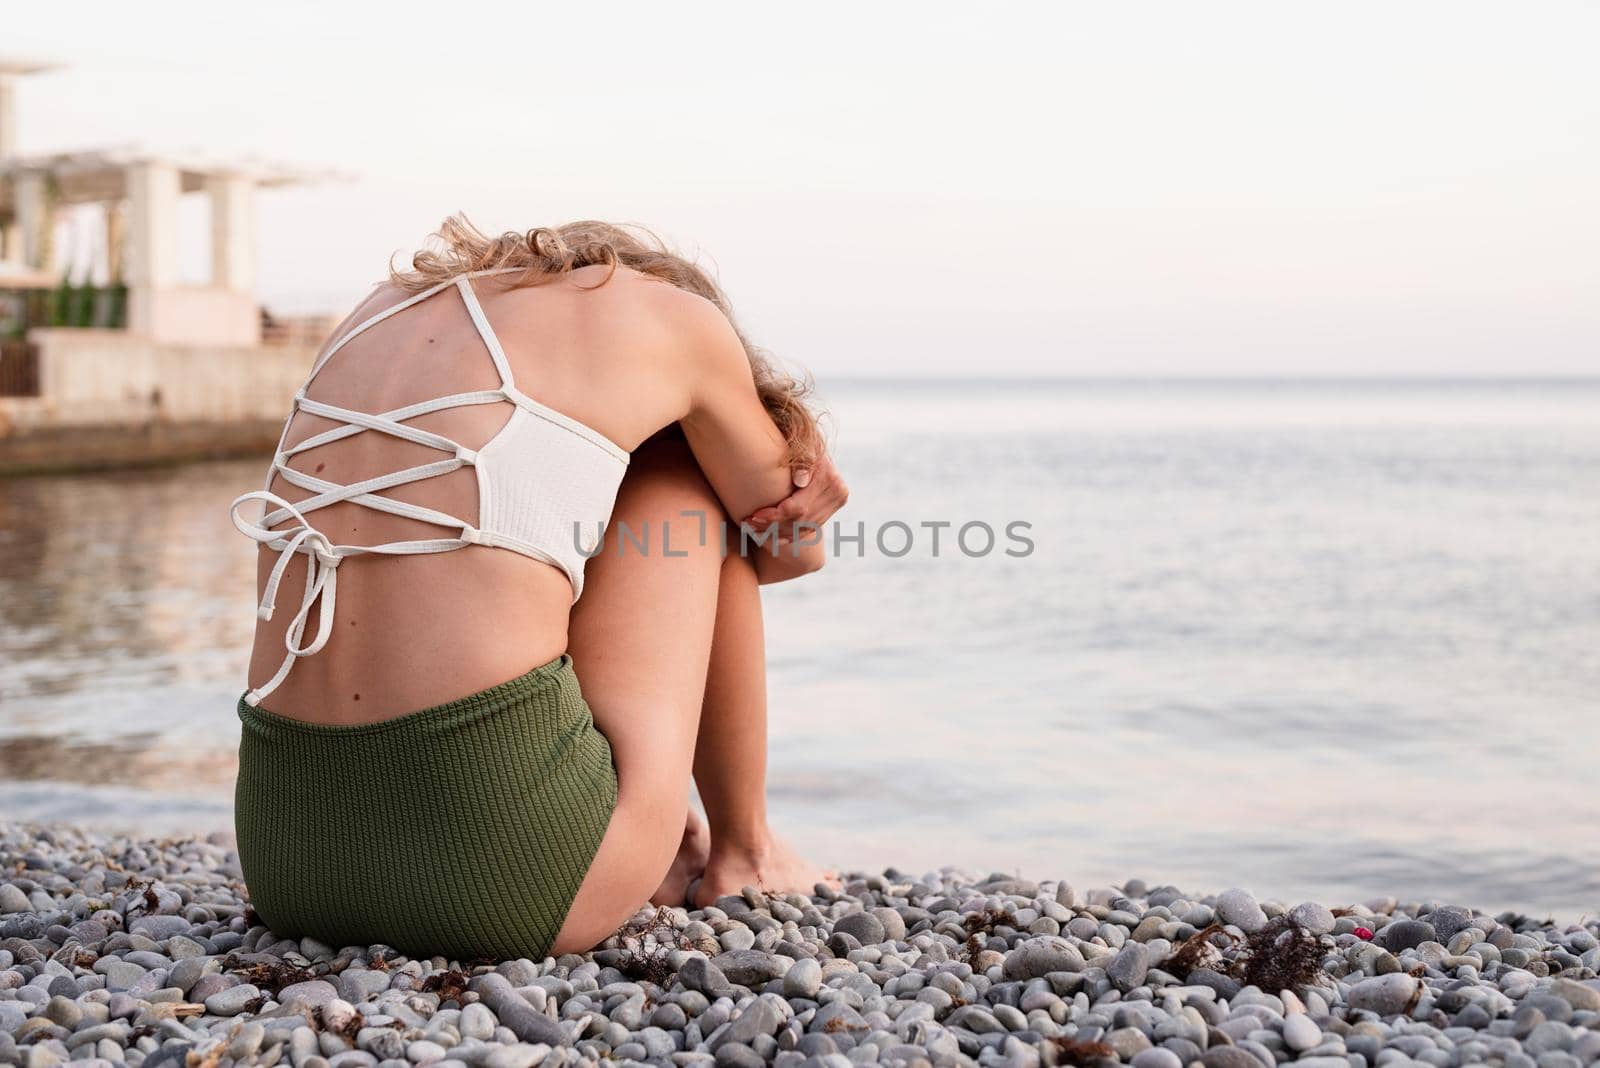 Mental health concept. Rear view of a depressed young woman in swimsuit sitting on the beach, arms around legs